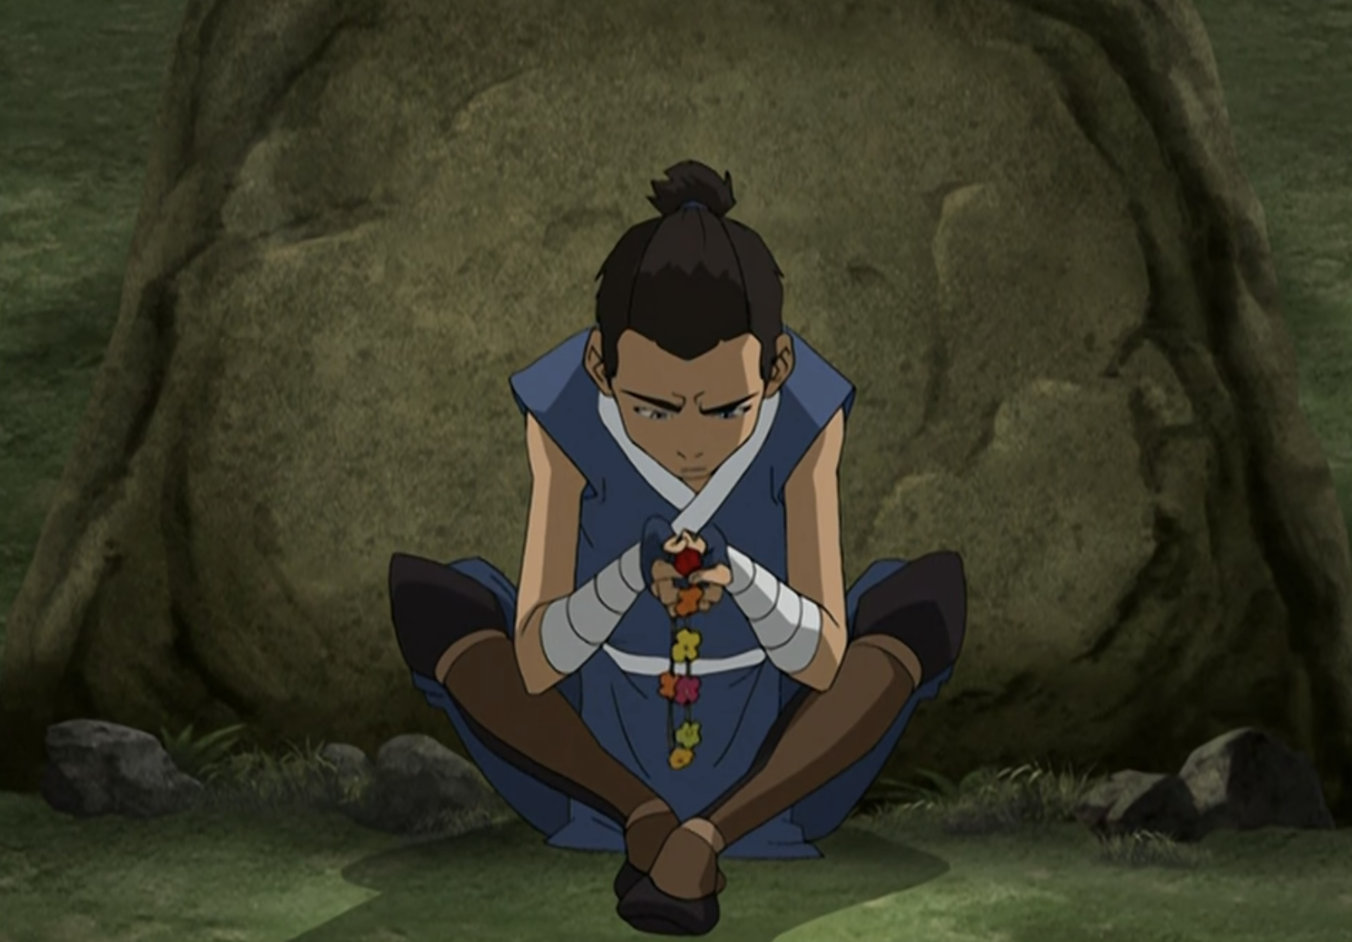 Sokka fiddling with a necklace made out of flowers